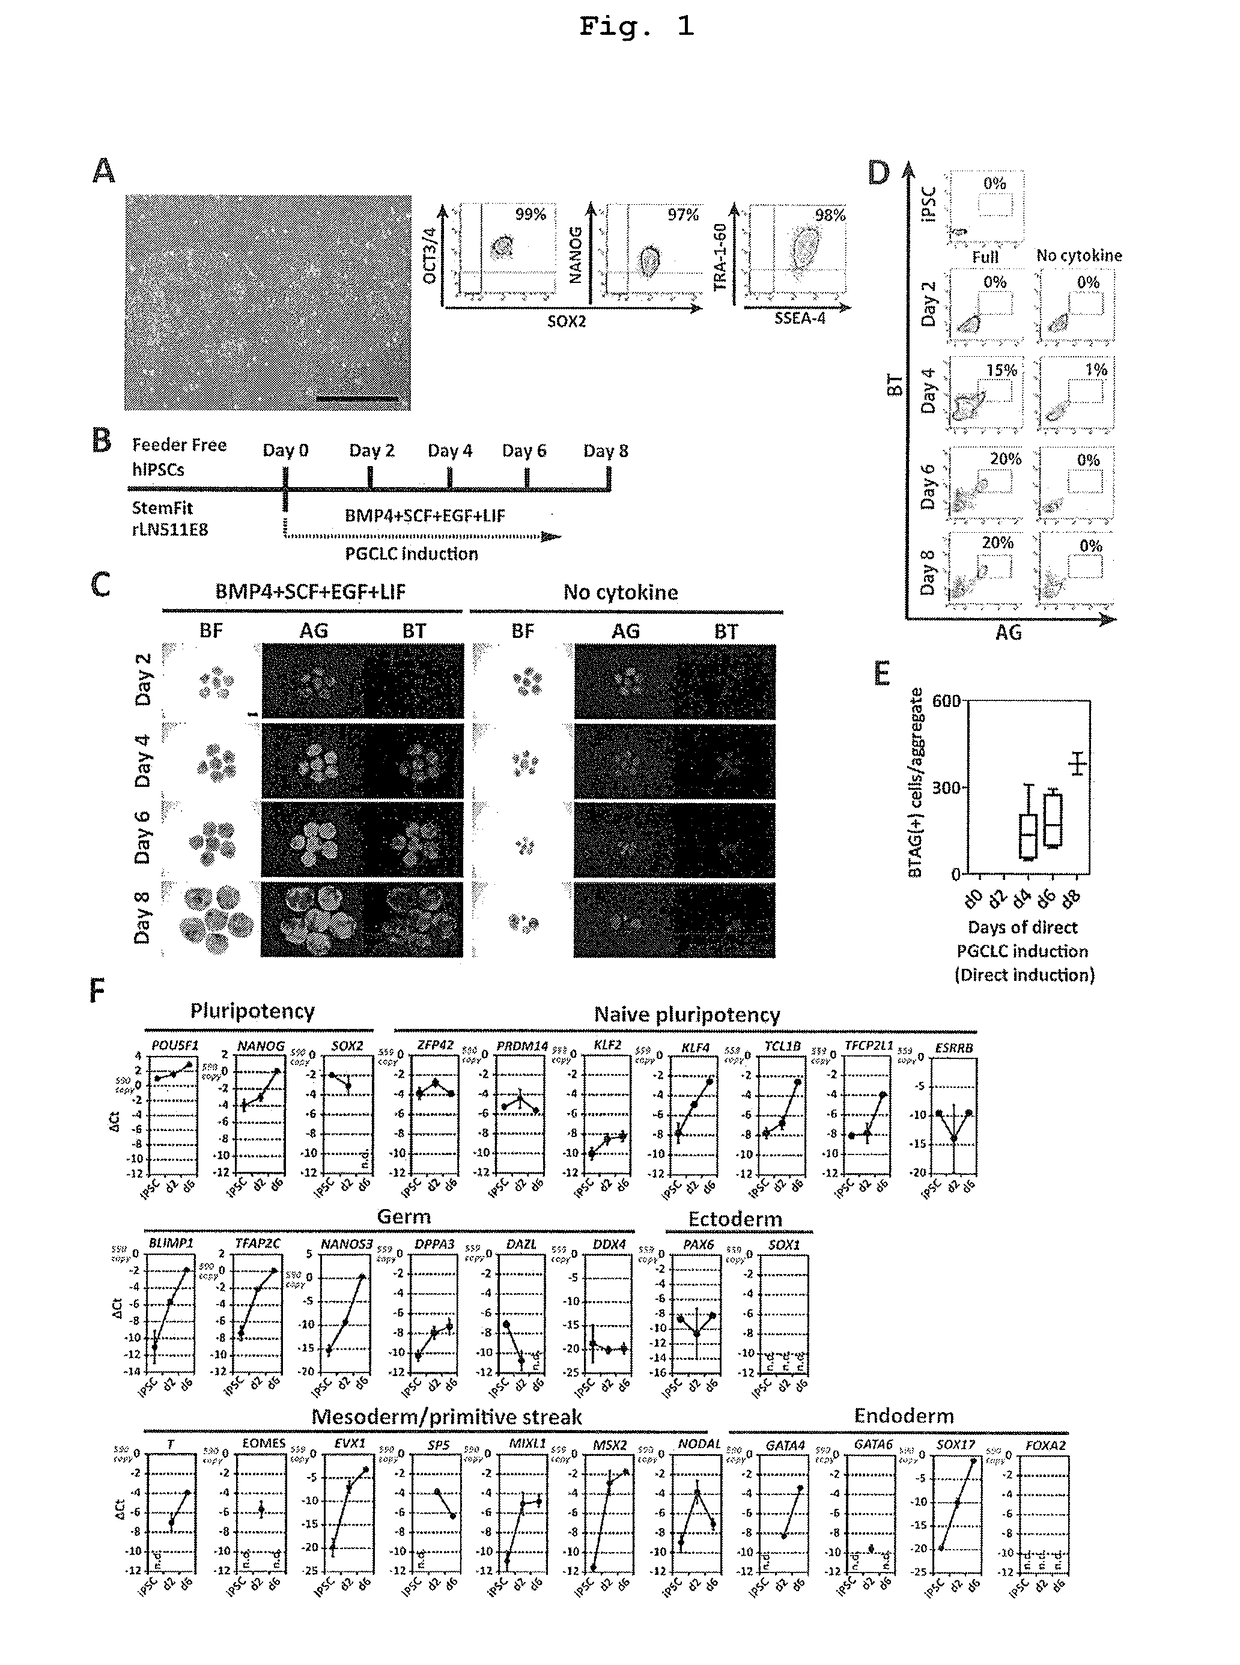 Method for inducing differentiation of pluripotent stem cells into germ cells